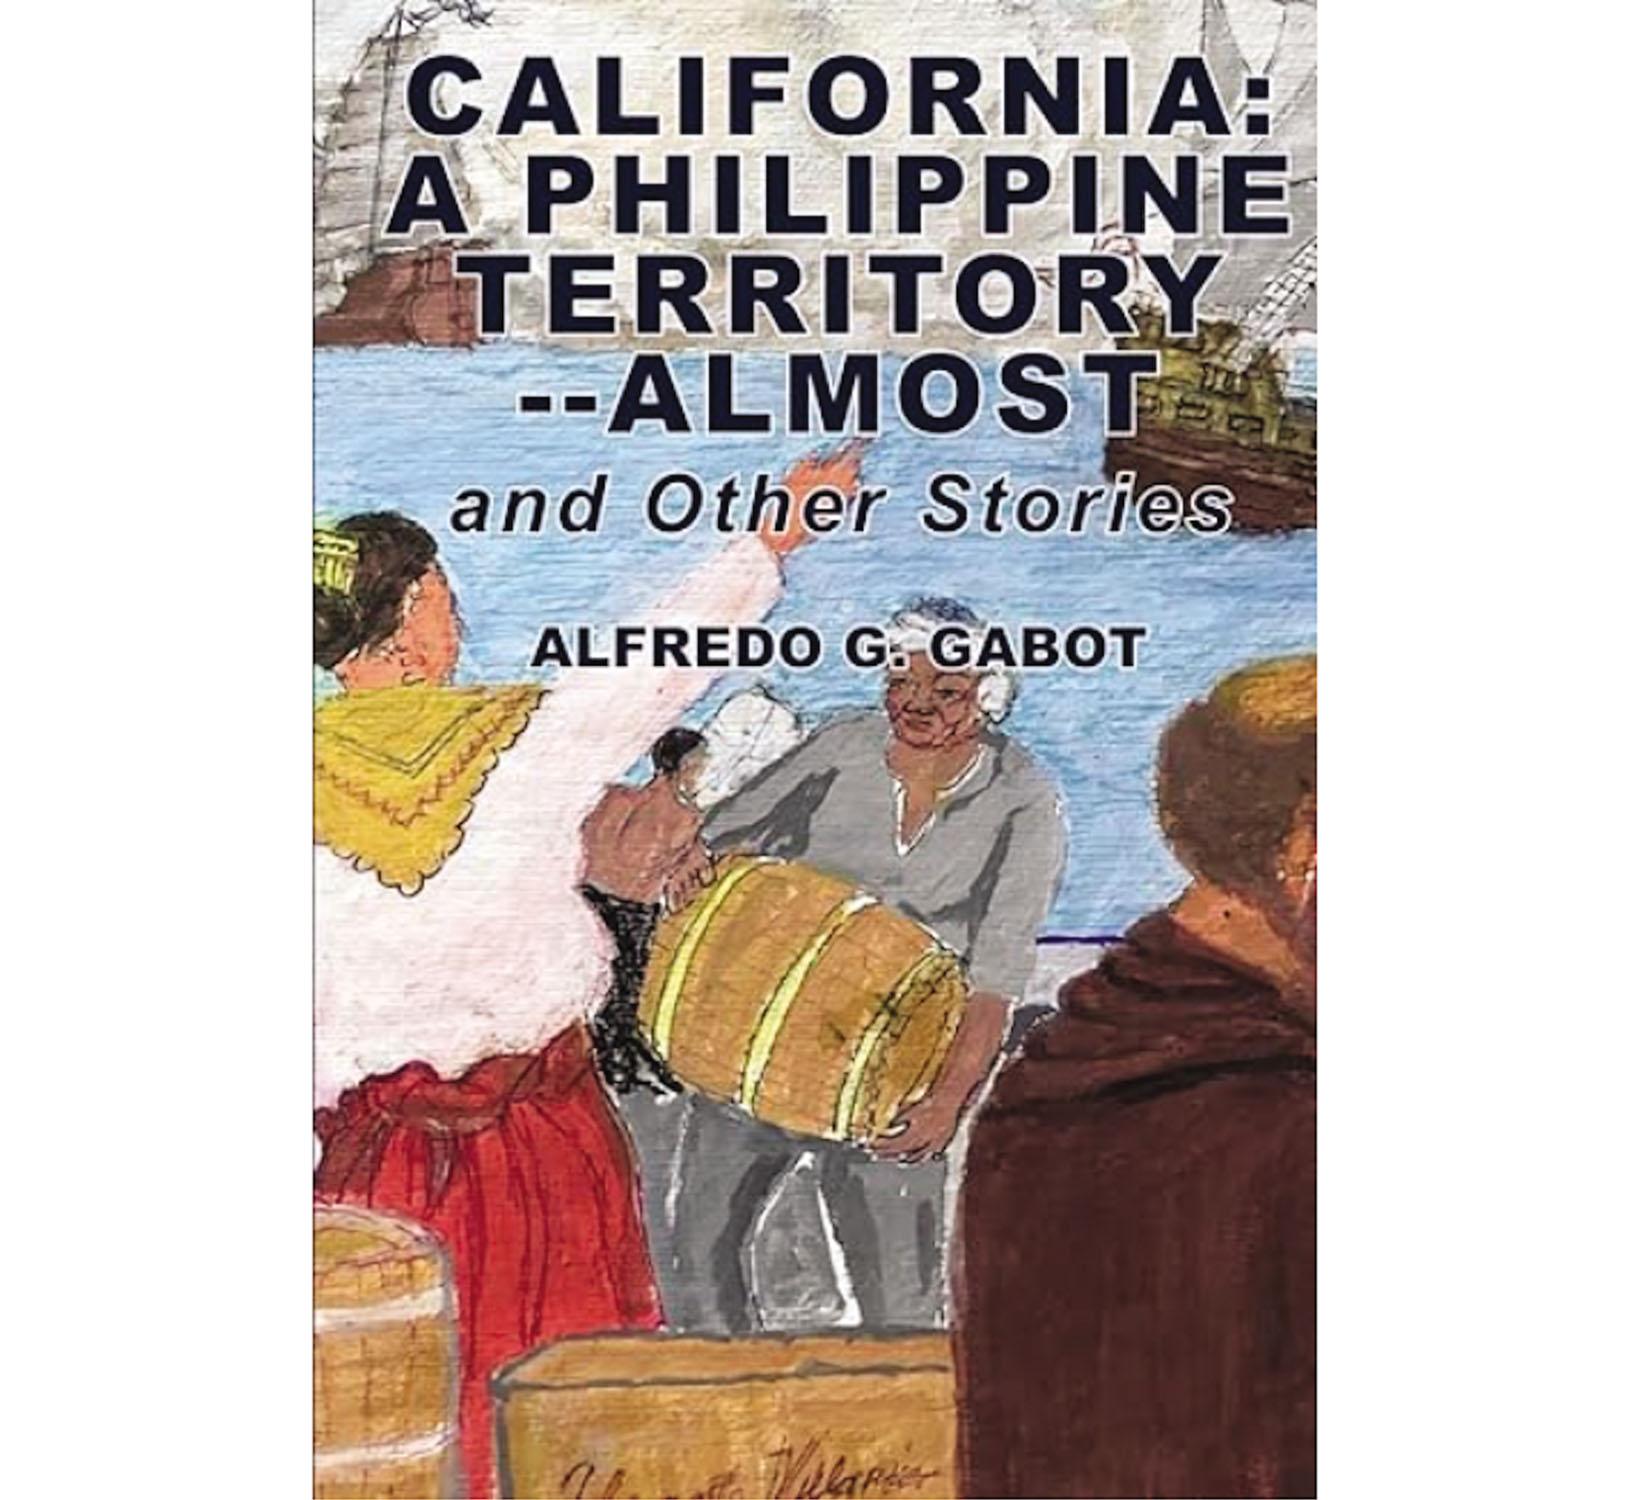 New book by journalist and professor Alfredo Gabot published in California — California State